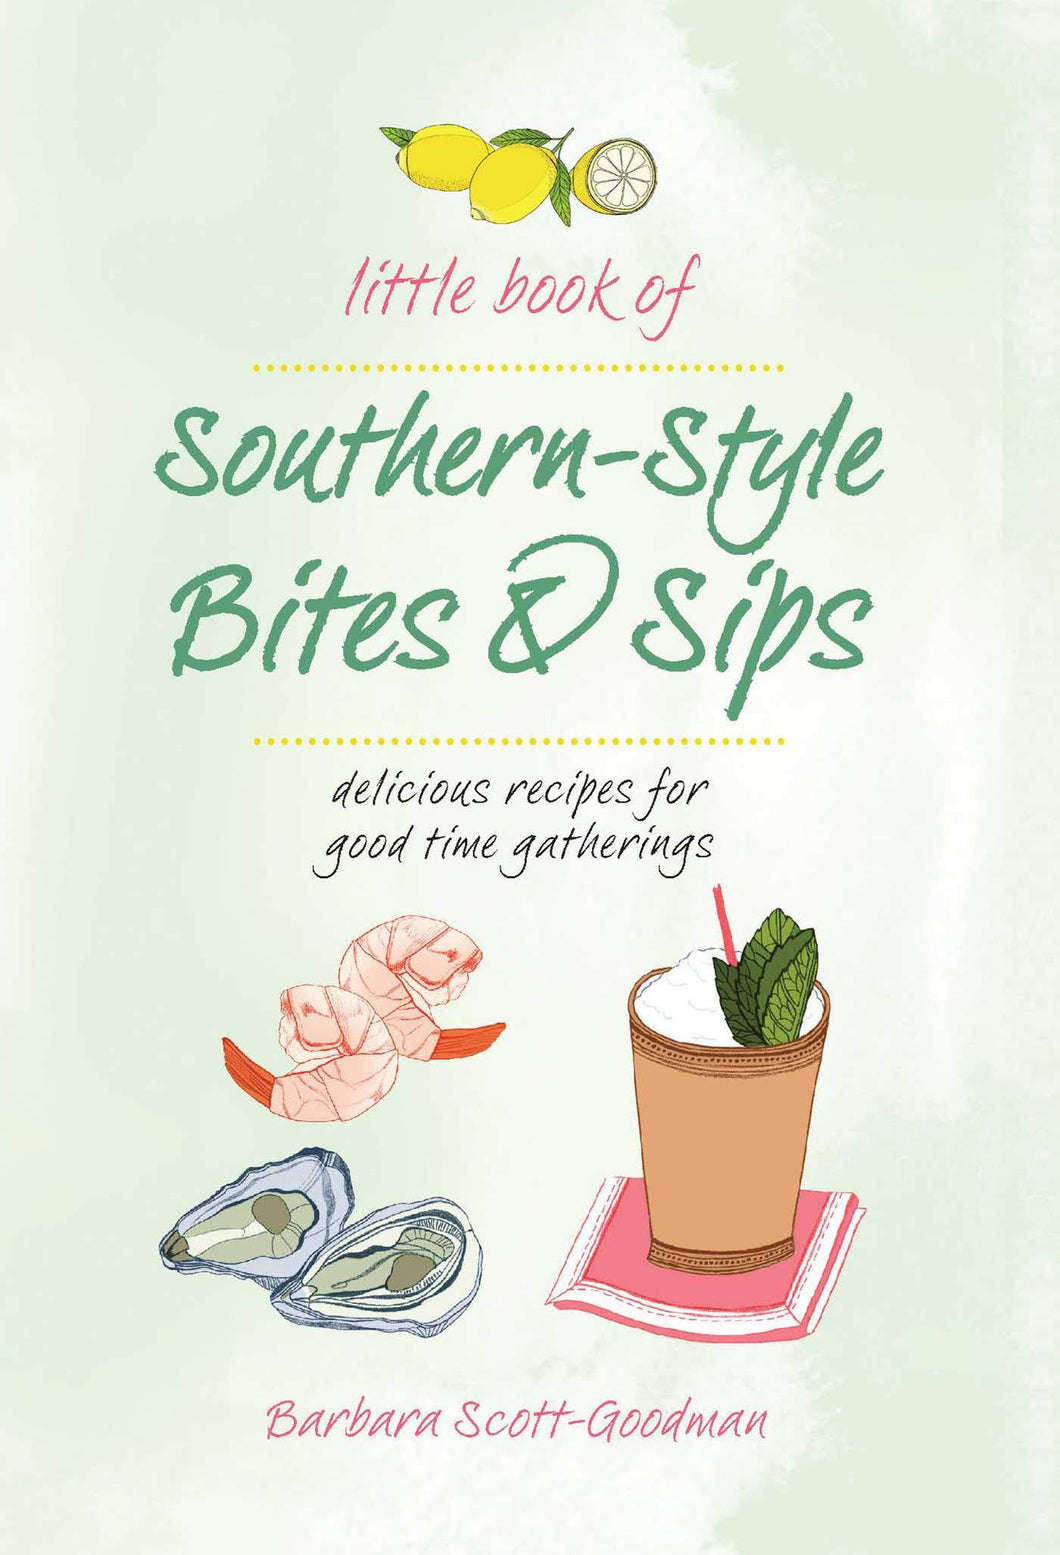 The Little Book of Southern-Style Bites & Sips